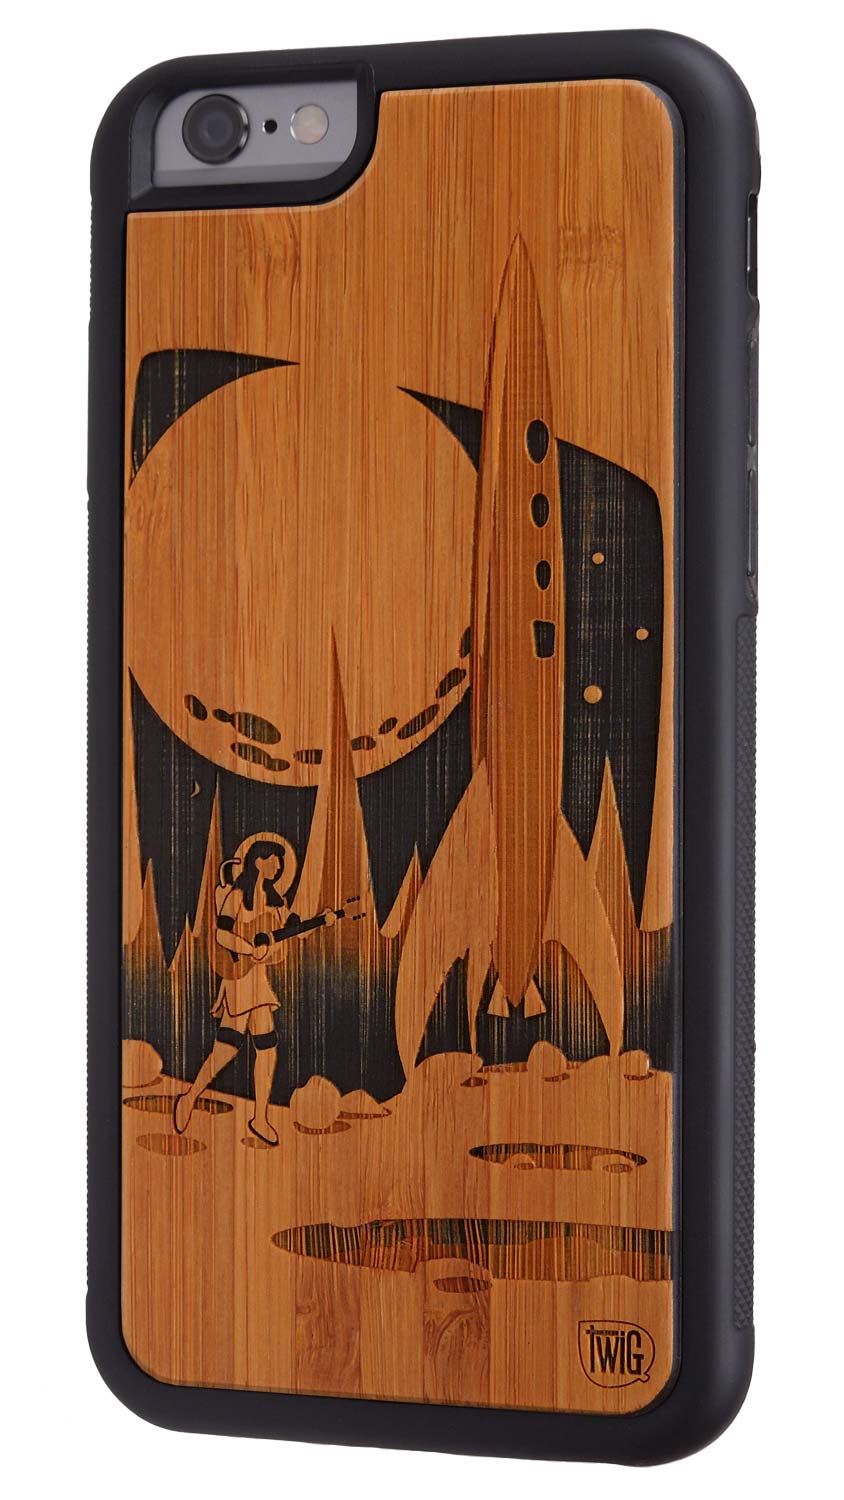 Moon Girl -  Bamboo iPhone Case, iPhone Case - Twig Case Co.